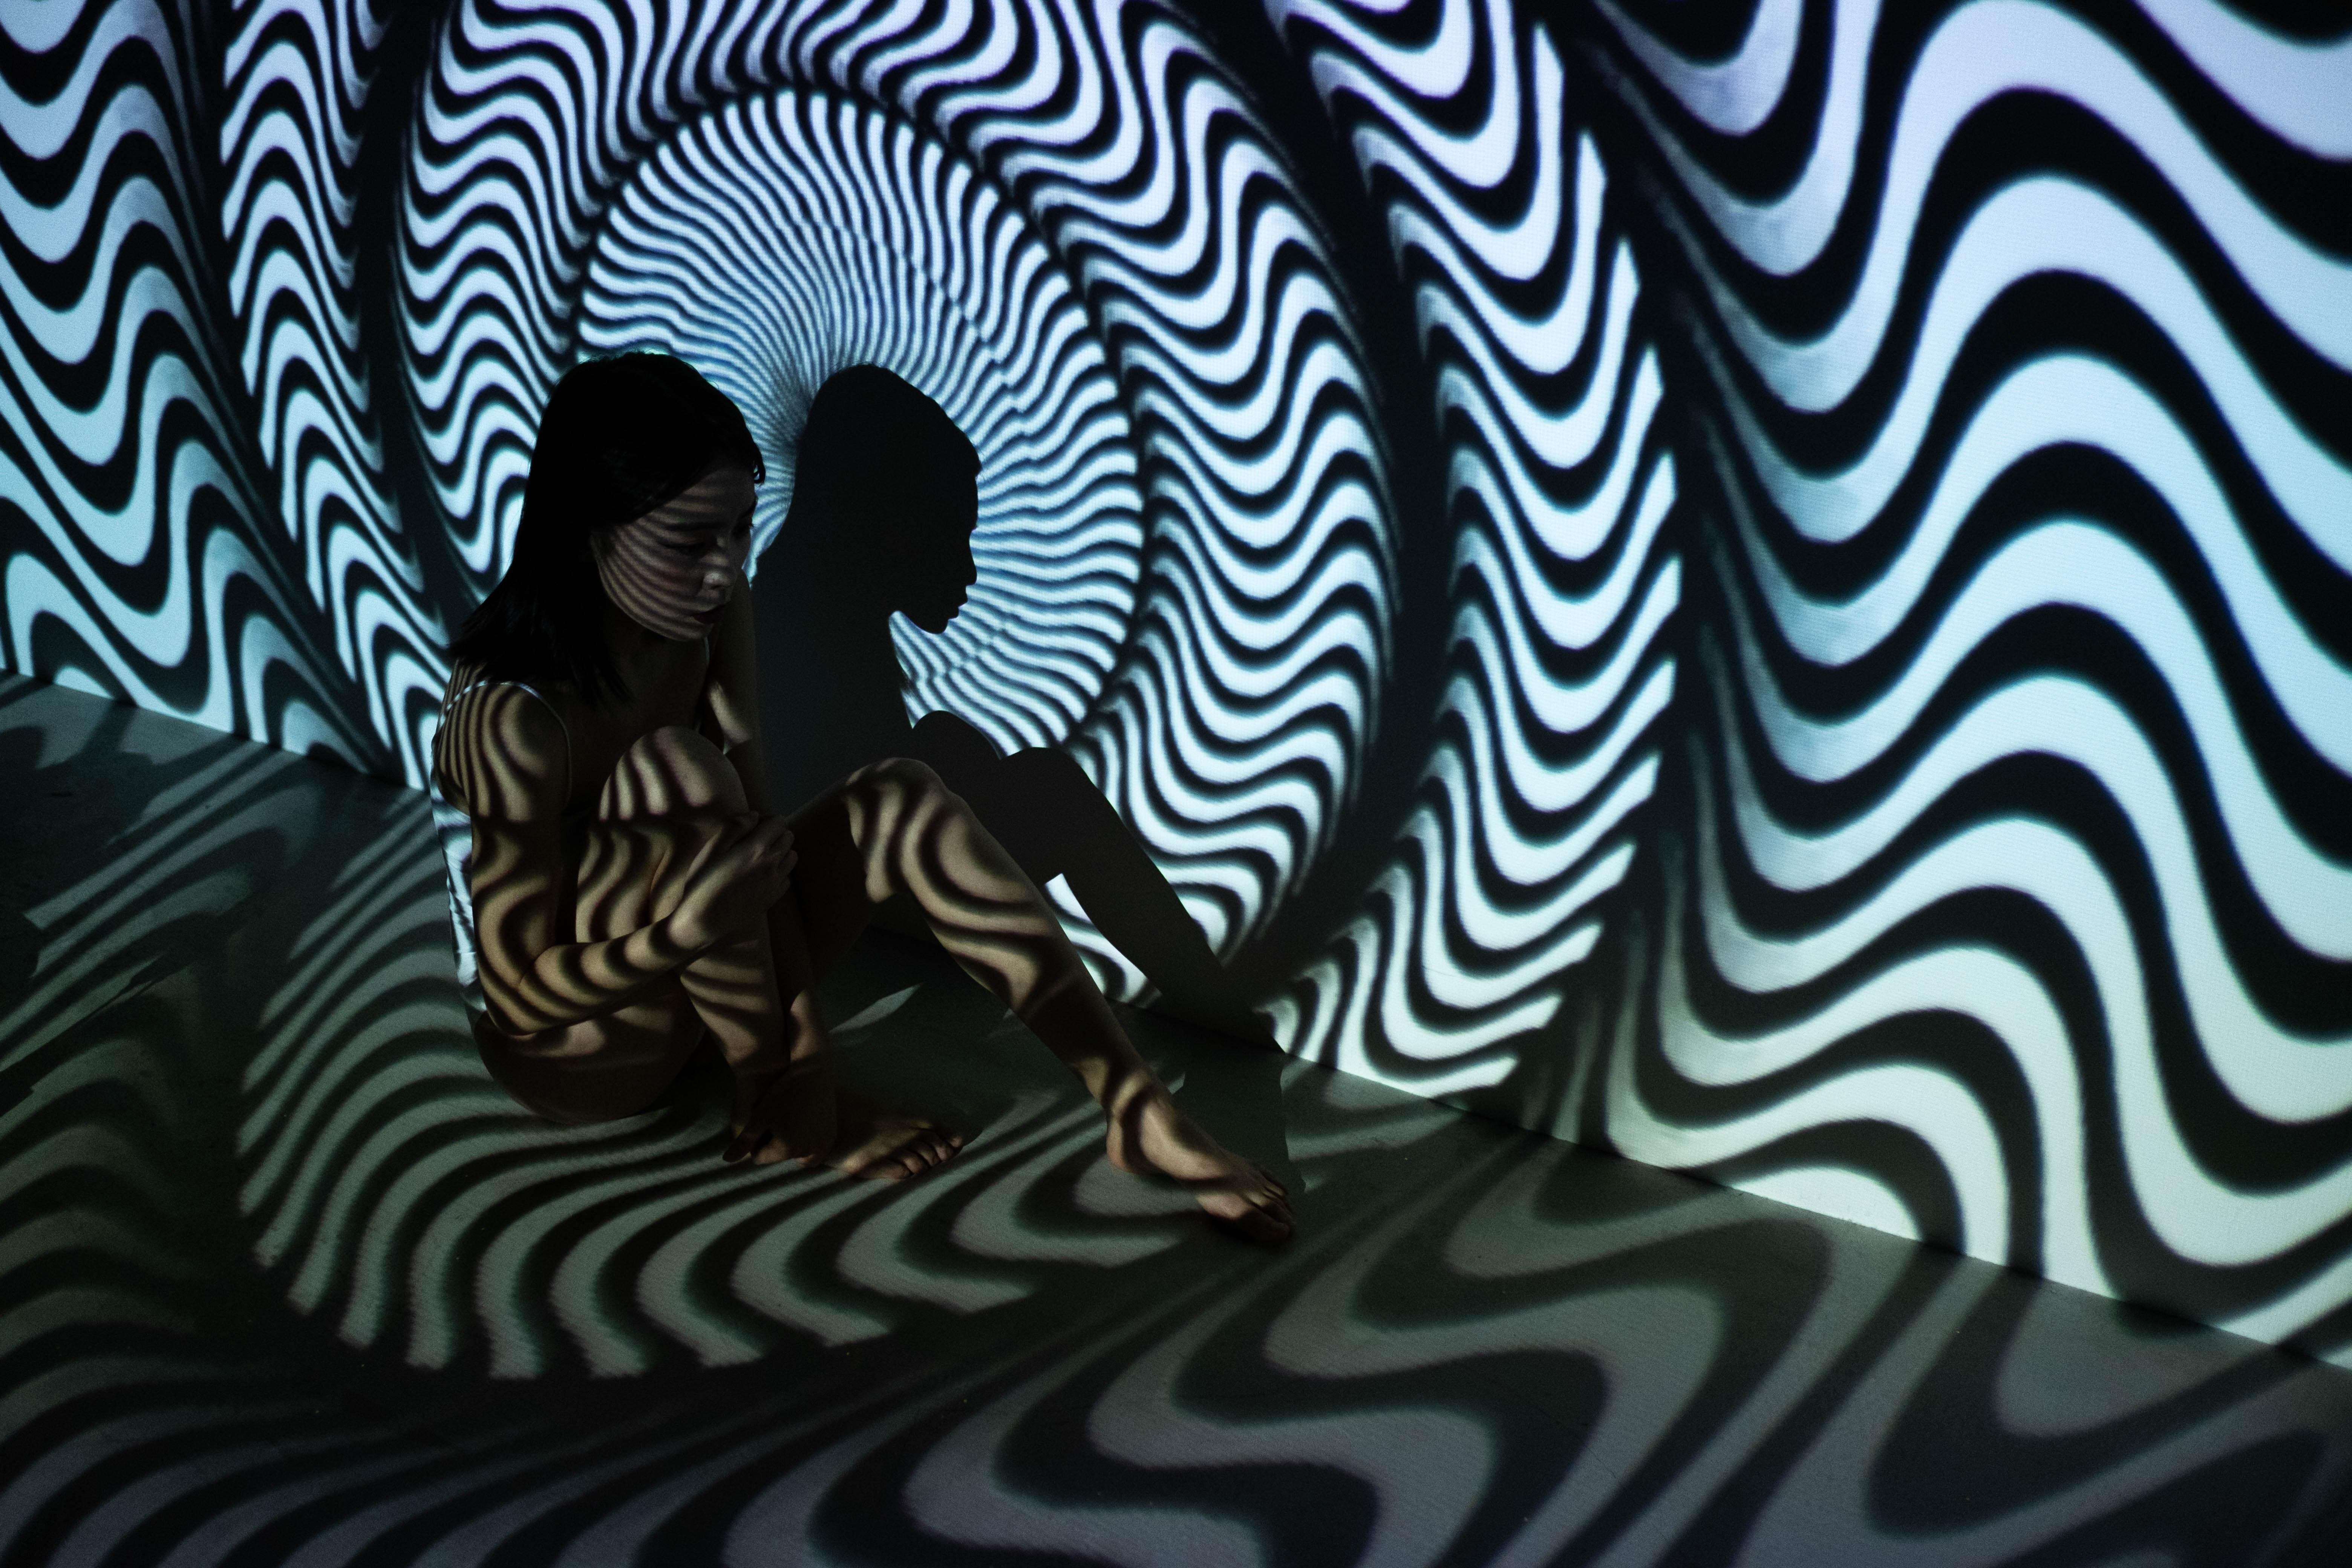 A person sitting in front of psychedelic art